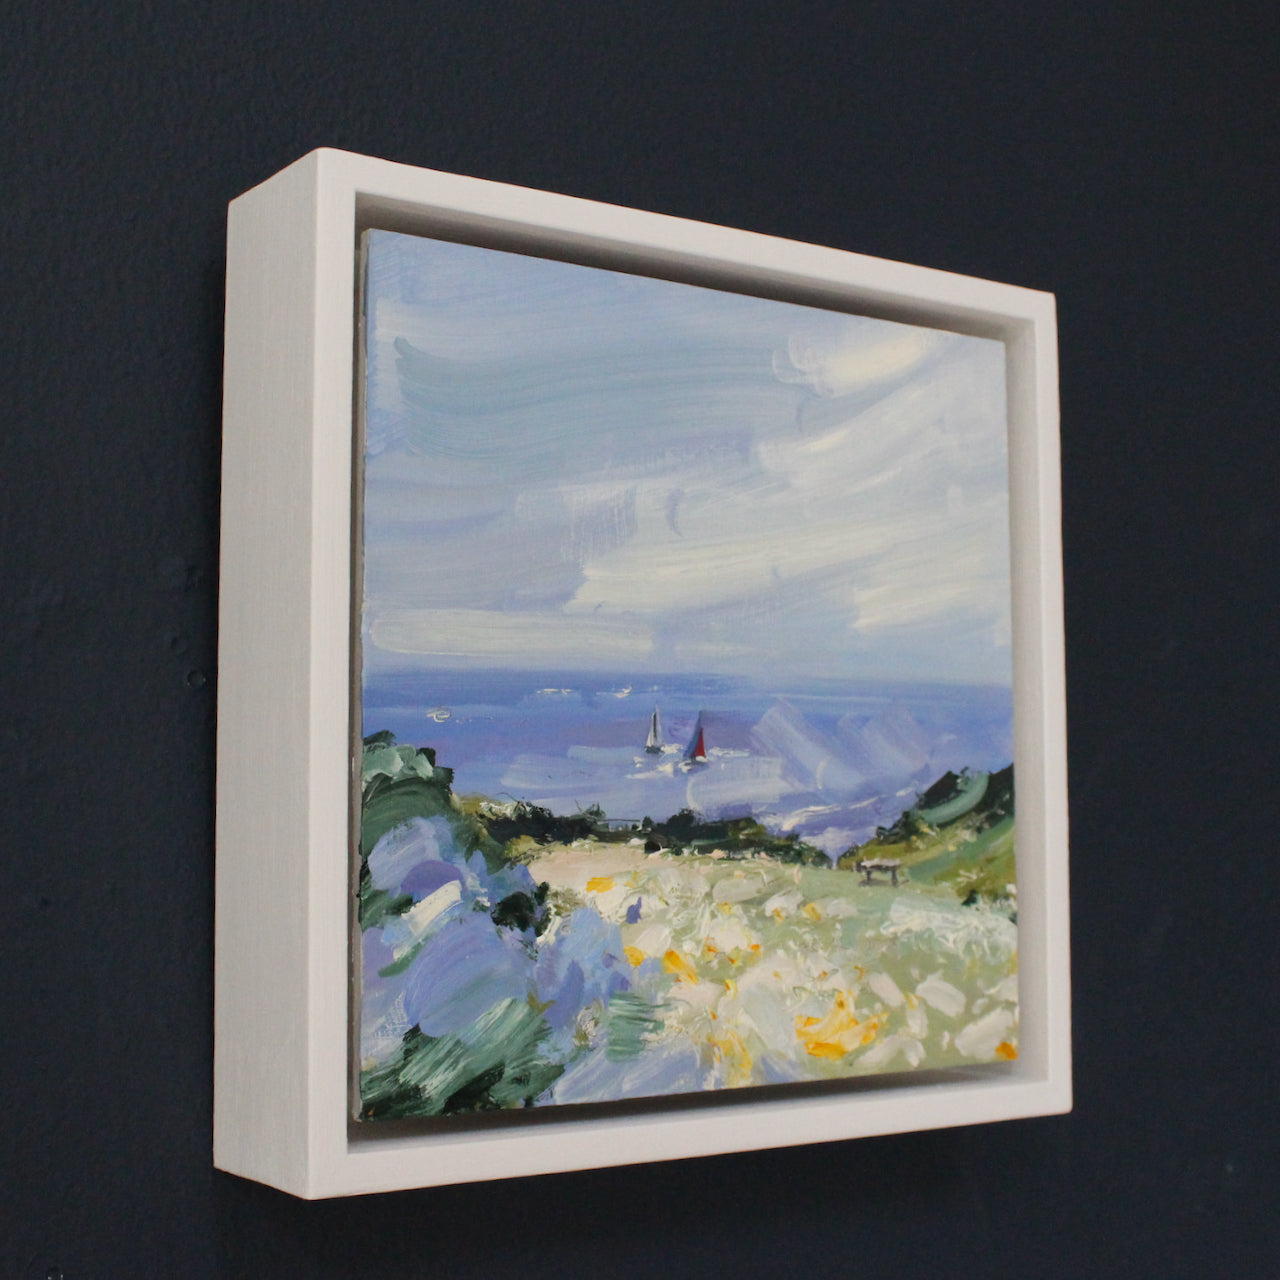 a small framed Seascape by artist Jill Hudson of boats sailing in the background and coastal landscape in foreground.